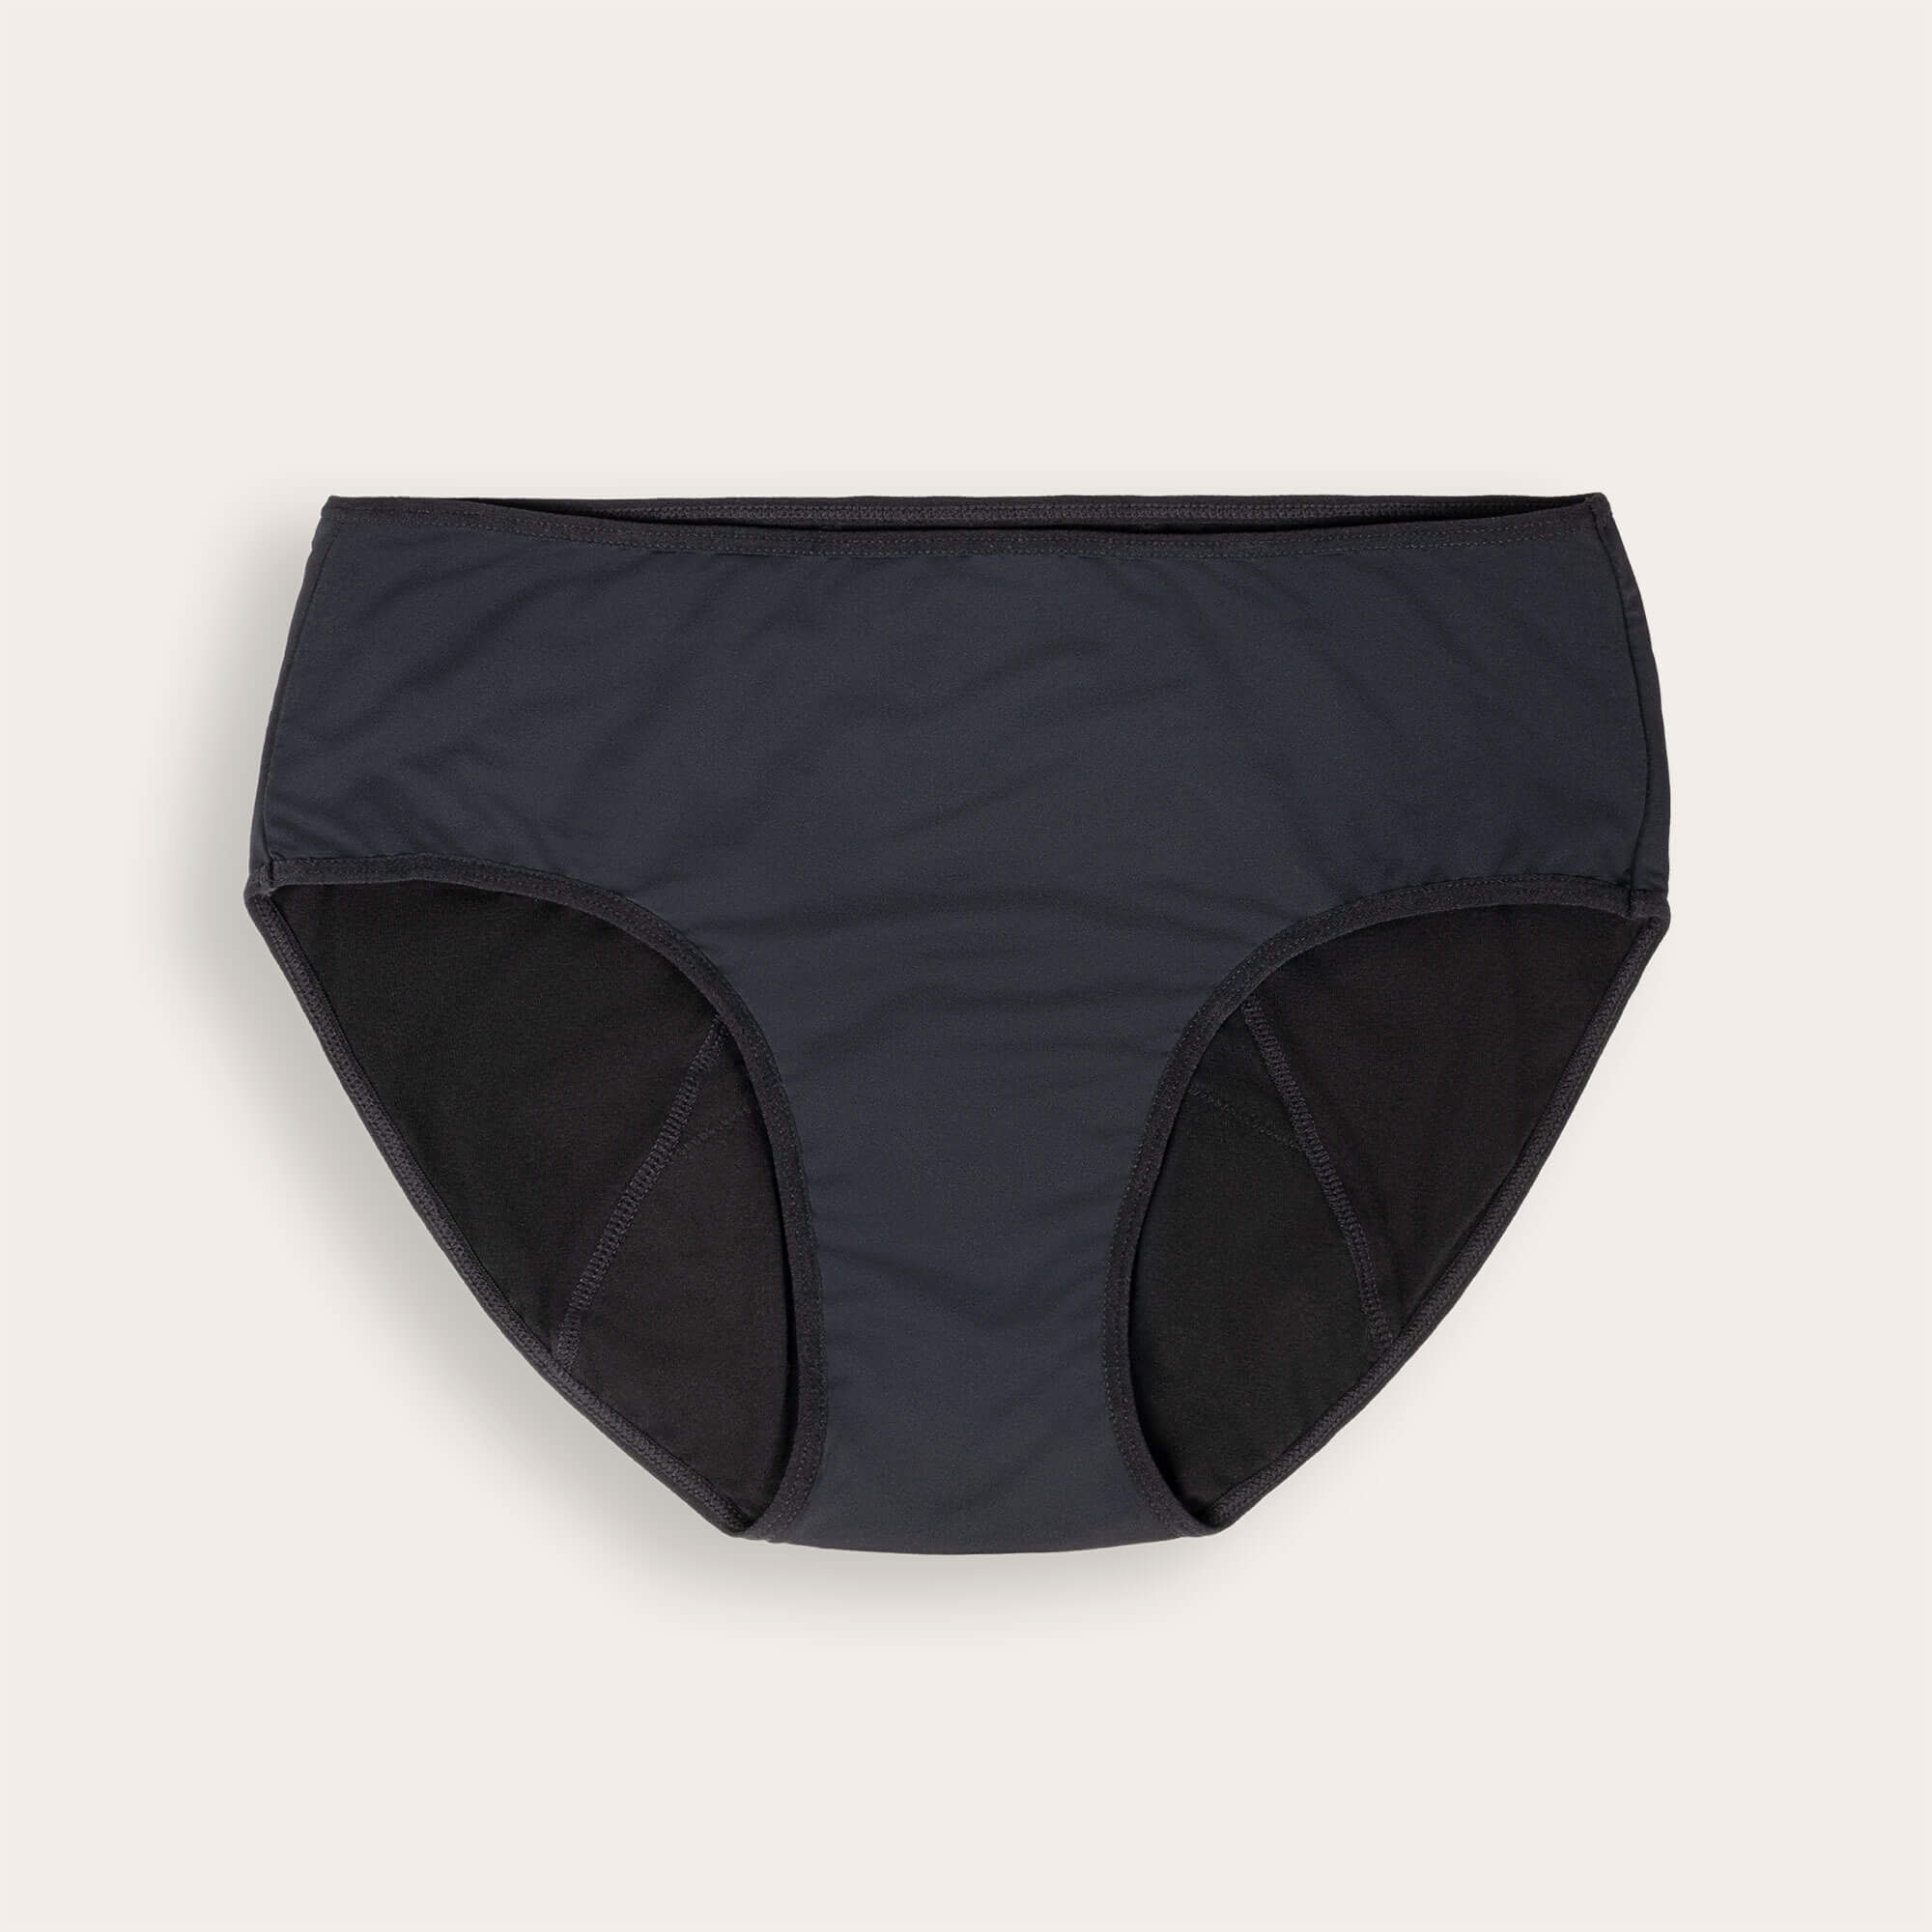 QNIX BacQup Period Underwear, XL, Black, Pack of 4 at Rs 1896.20, Personal Care Products